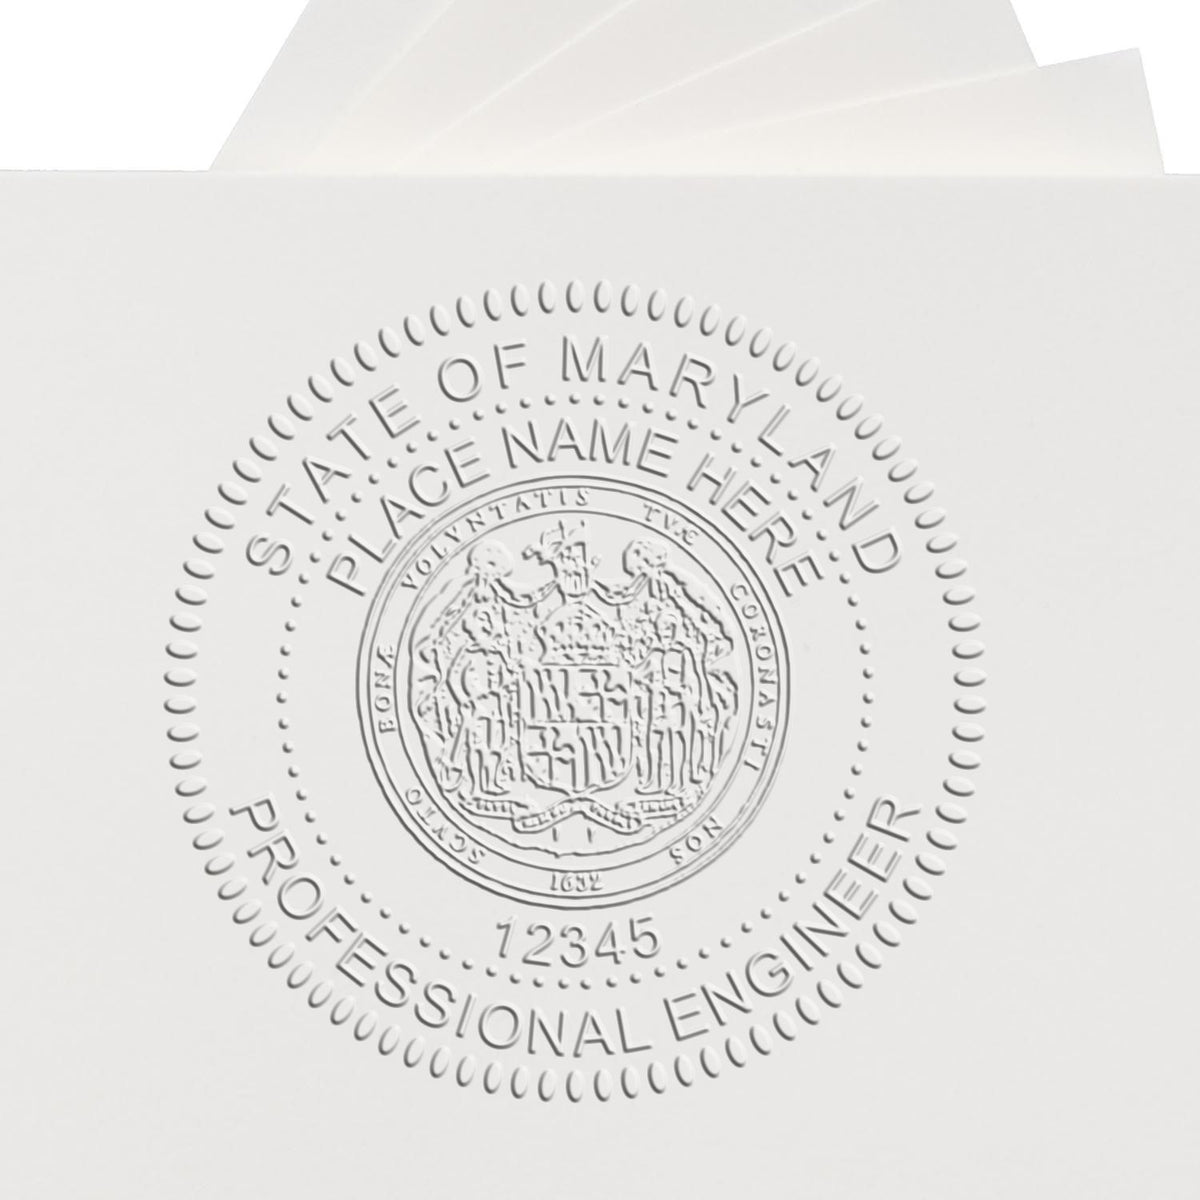 An in use photo of the Hybrid Maryland Engineer Seal showing a sample imprint on a cardstock